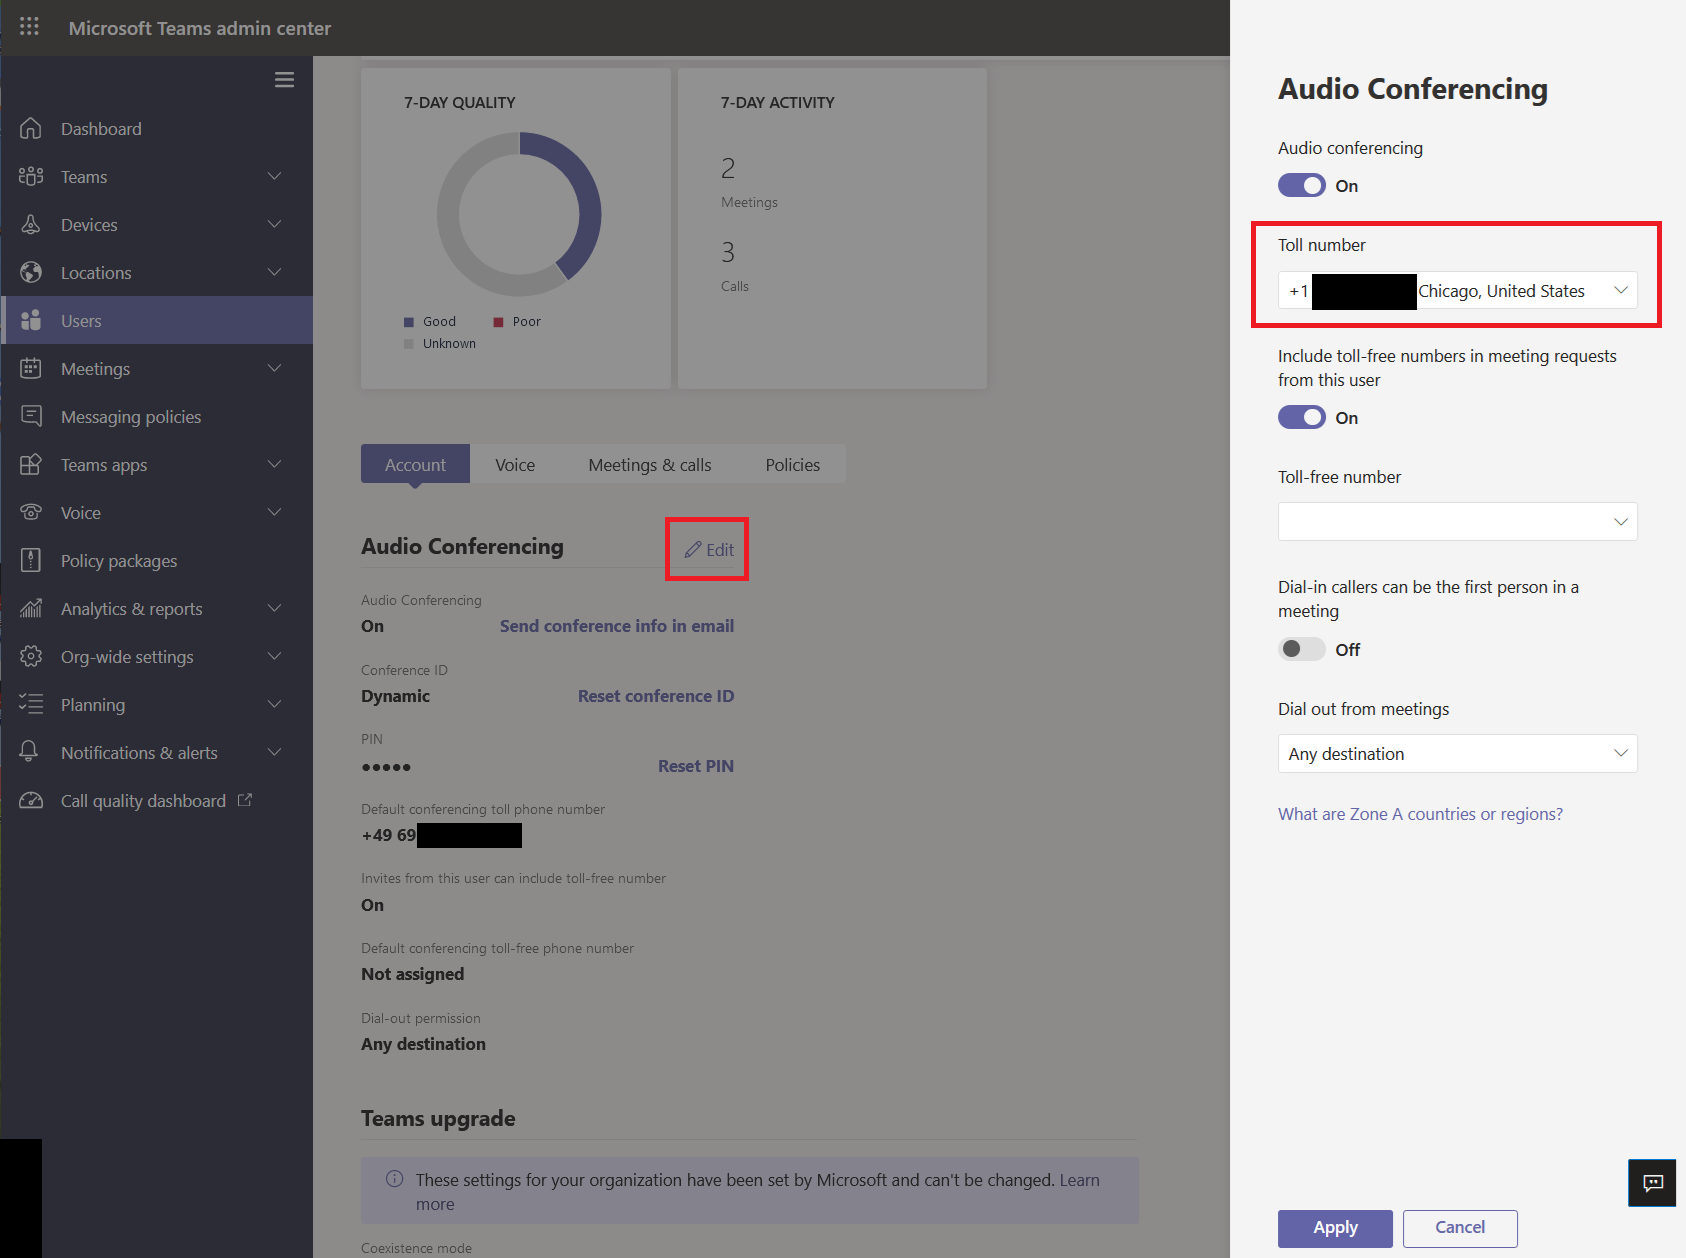 Microsoft Teams Admin Center with options to change the dialin number for a user.